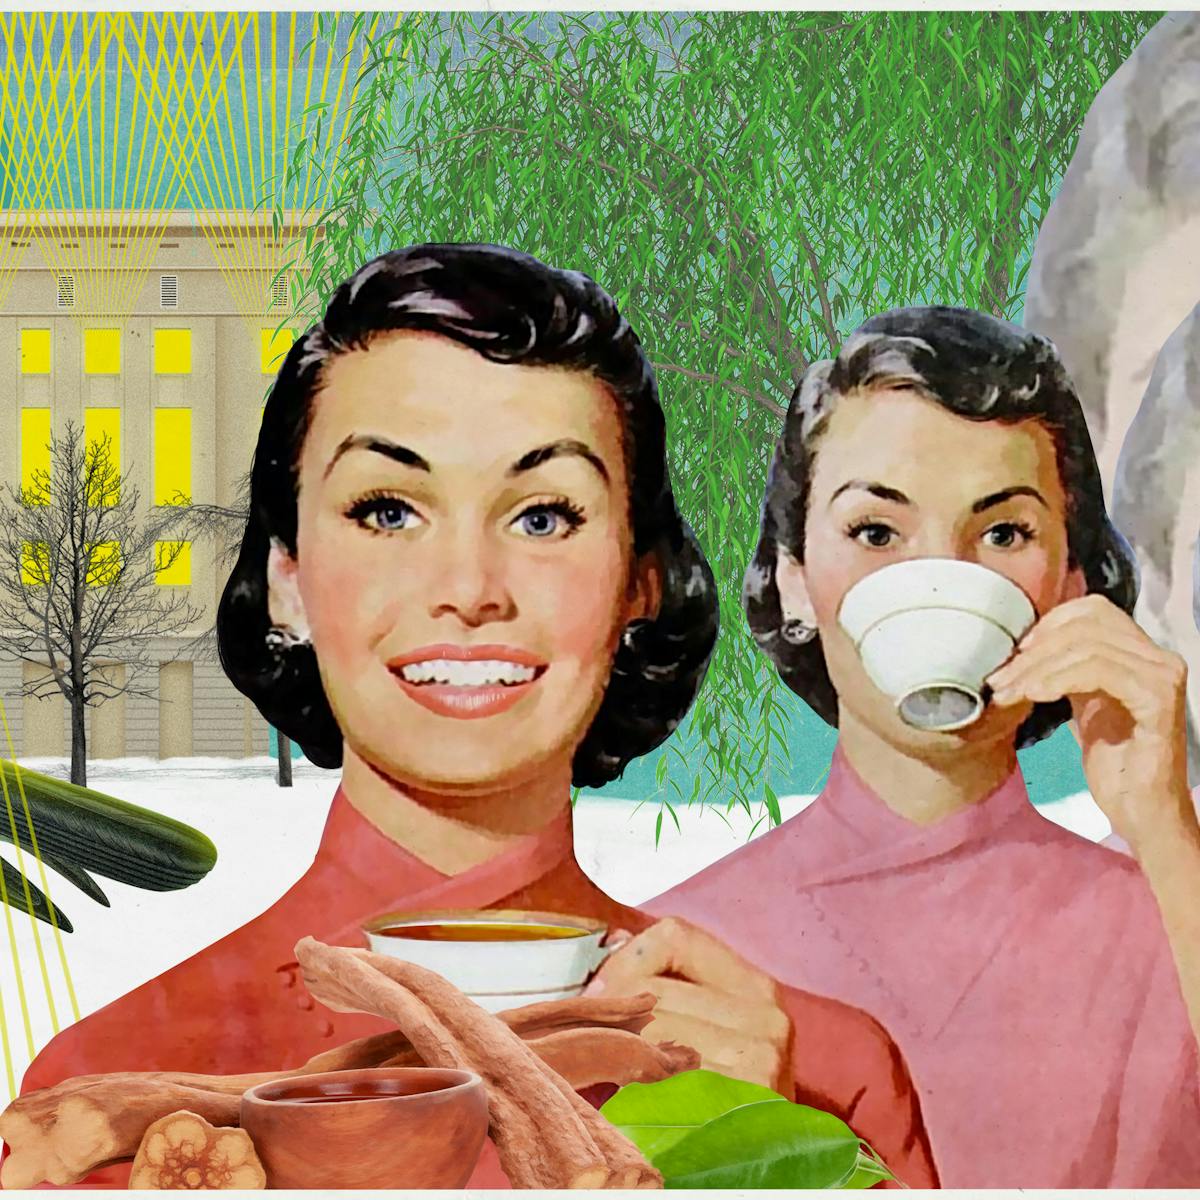 Mixed media digital artwork combining found imagery from vintage magazines and books with painted and textured elements. The overall hues are greens, yellows and pinks. At the centre of the artwork is a woman with short black hair wearing a red/pink Kimono. She is pictured from the shoulders up. In her left raised hand is a white china teacup. She is smiling broadly, looking straight at the viewer. In front of her are brown sticks of the ayahuasca plant and several green leaves. Behind the woman in the background to the right is a large tree in full green leaf.
To the right, the same woman is repeated several times. In the first duplication she is slightly paler in tone and the teacup is raised to her lips. To the right again, the duplicate woman is reduced in tone and scale and looking towards the viewer with a neutral expression, teacup I hand. In the centre of her forehead is an extra eye. Behind this figure, two further duplications disappear into the distance behind her, increasing in scale. To the left of the woman in the centre of the image is a crow in profile, stood on a rock with a white and red pill capsule in its mouth. Behind the crow is a snowy scene surrounding a large industrial building. The lights inside the building are bright yellow with fans of laser lights shining out of the windows into the sky and towards the viewer over the back of the crow. 